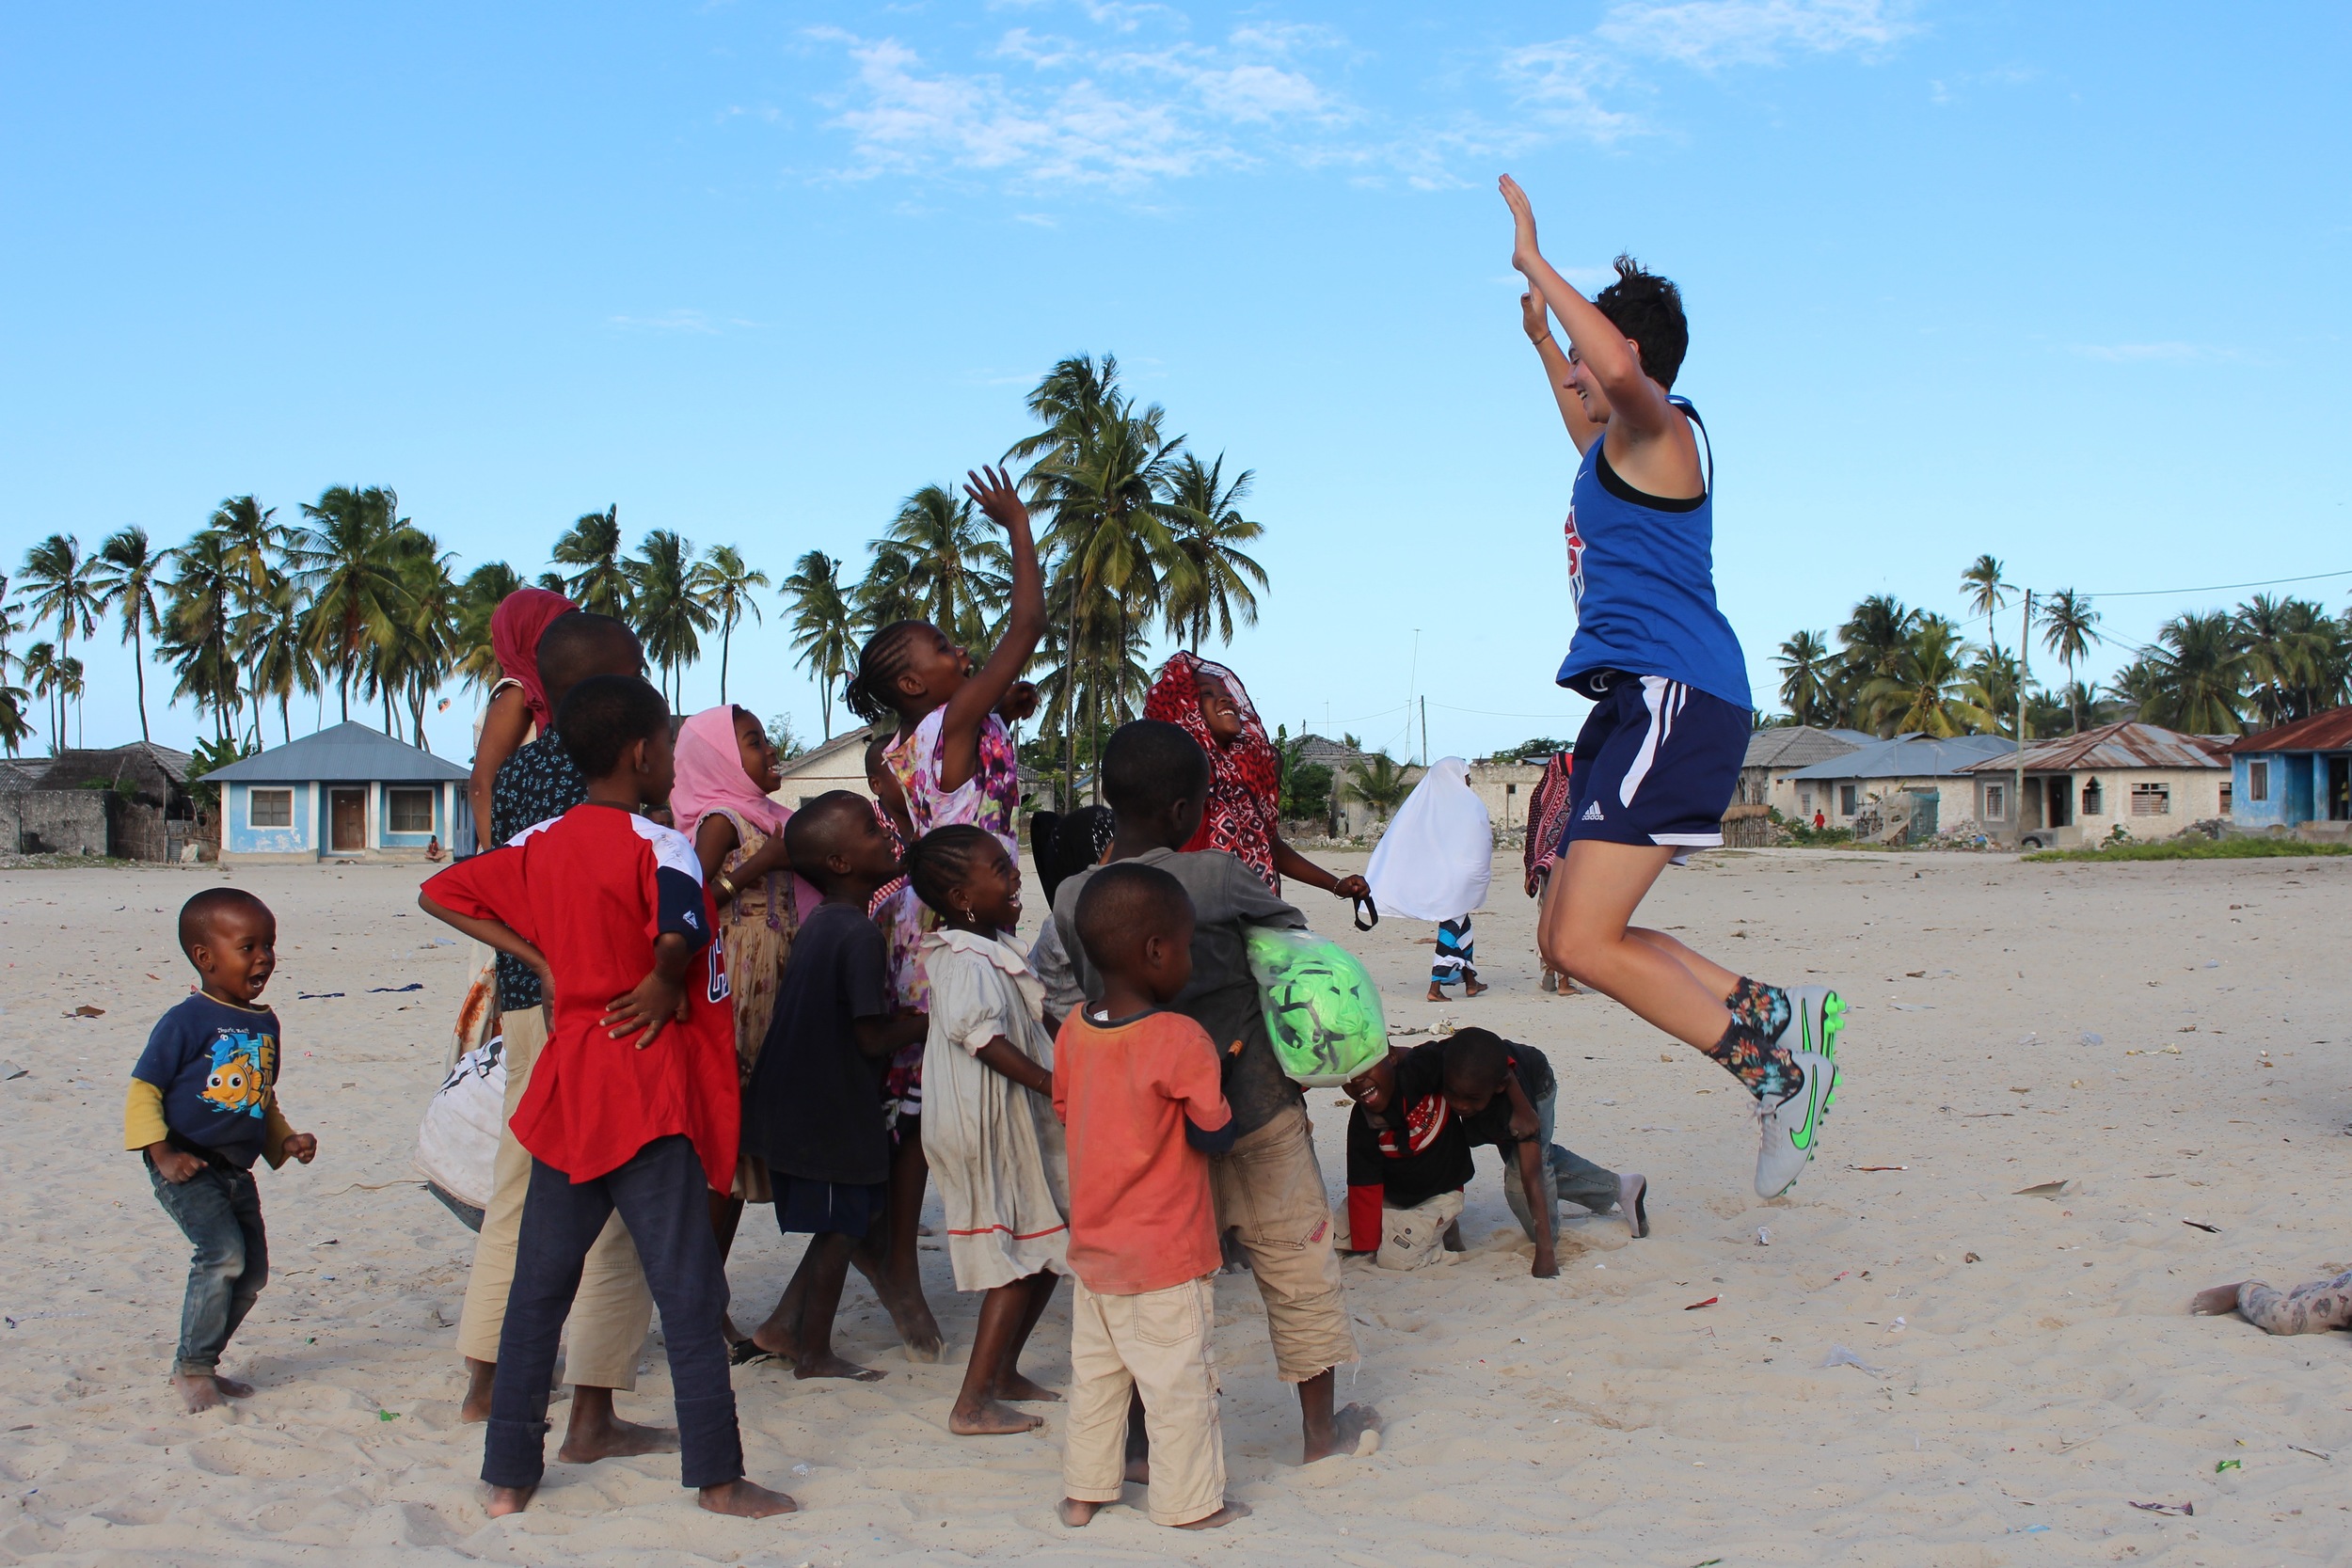 Megan organizing a jumping photo in Paje, July 2015